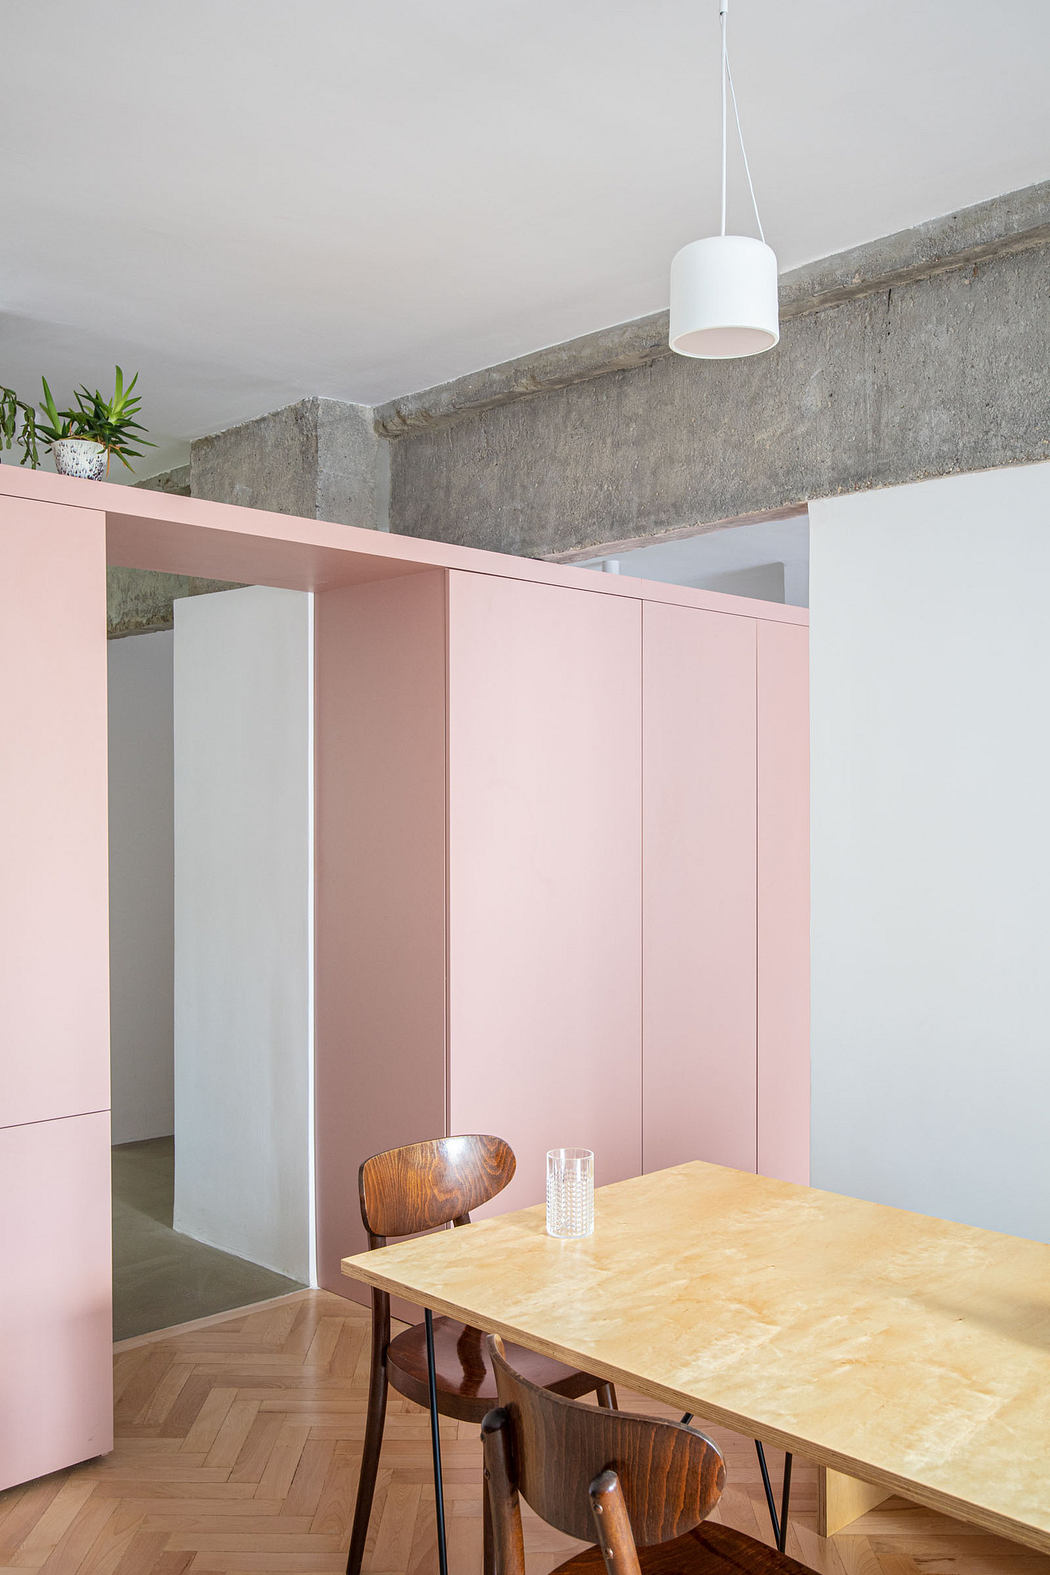 Modern room with pink sliding panels, wooden table, chairs, and pendant light.